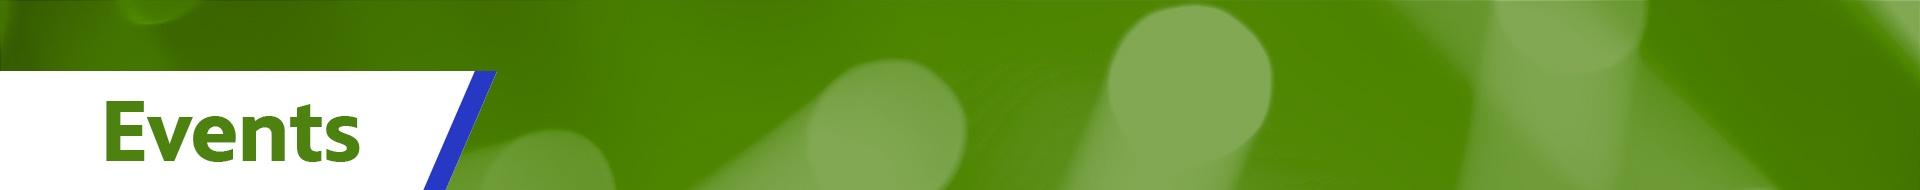 Events page banner, with Events task on blurred green background with spotlights